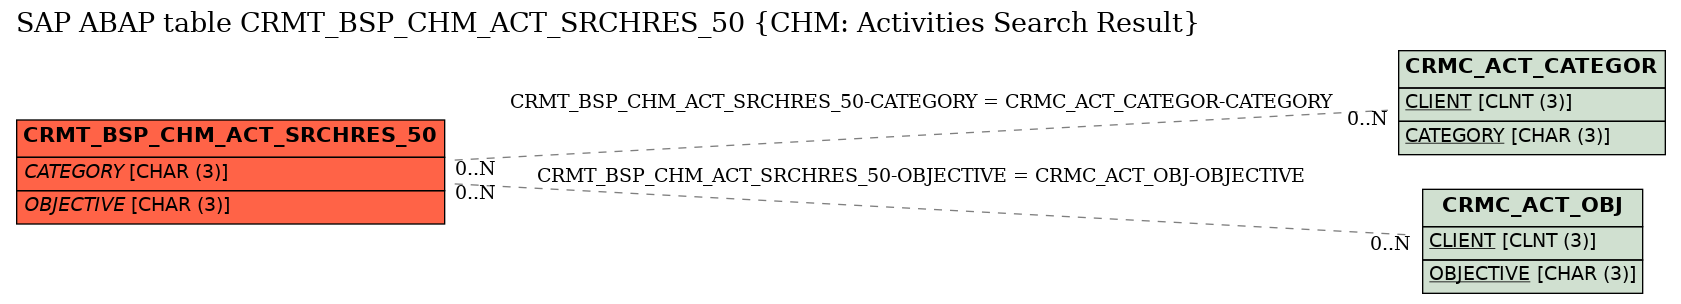 E-R Diagram for table CRMT_BSP_CHM_ACT_SRCHRES_50 (CHM: Activities Search Result)